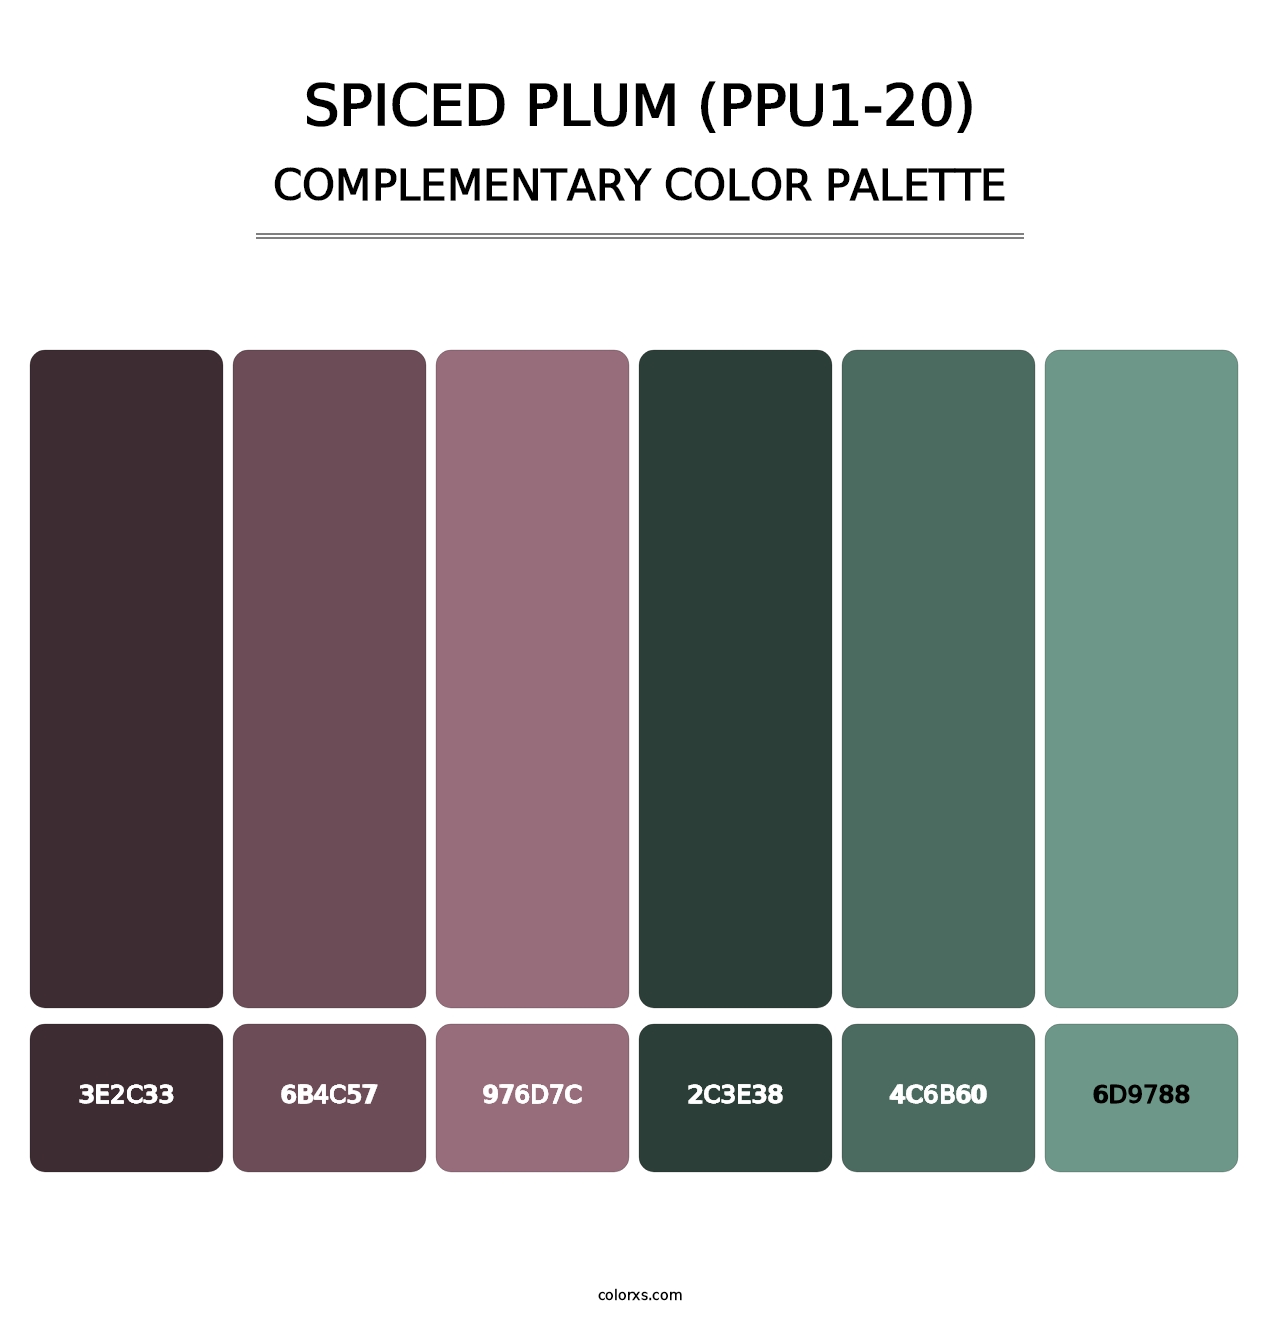 Spiced Plum (PPU1-20) - Complementary Color Palette